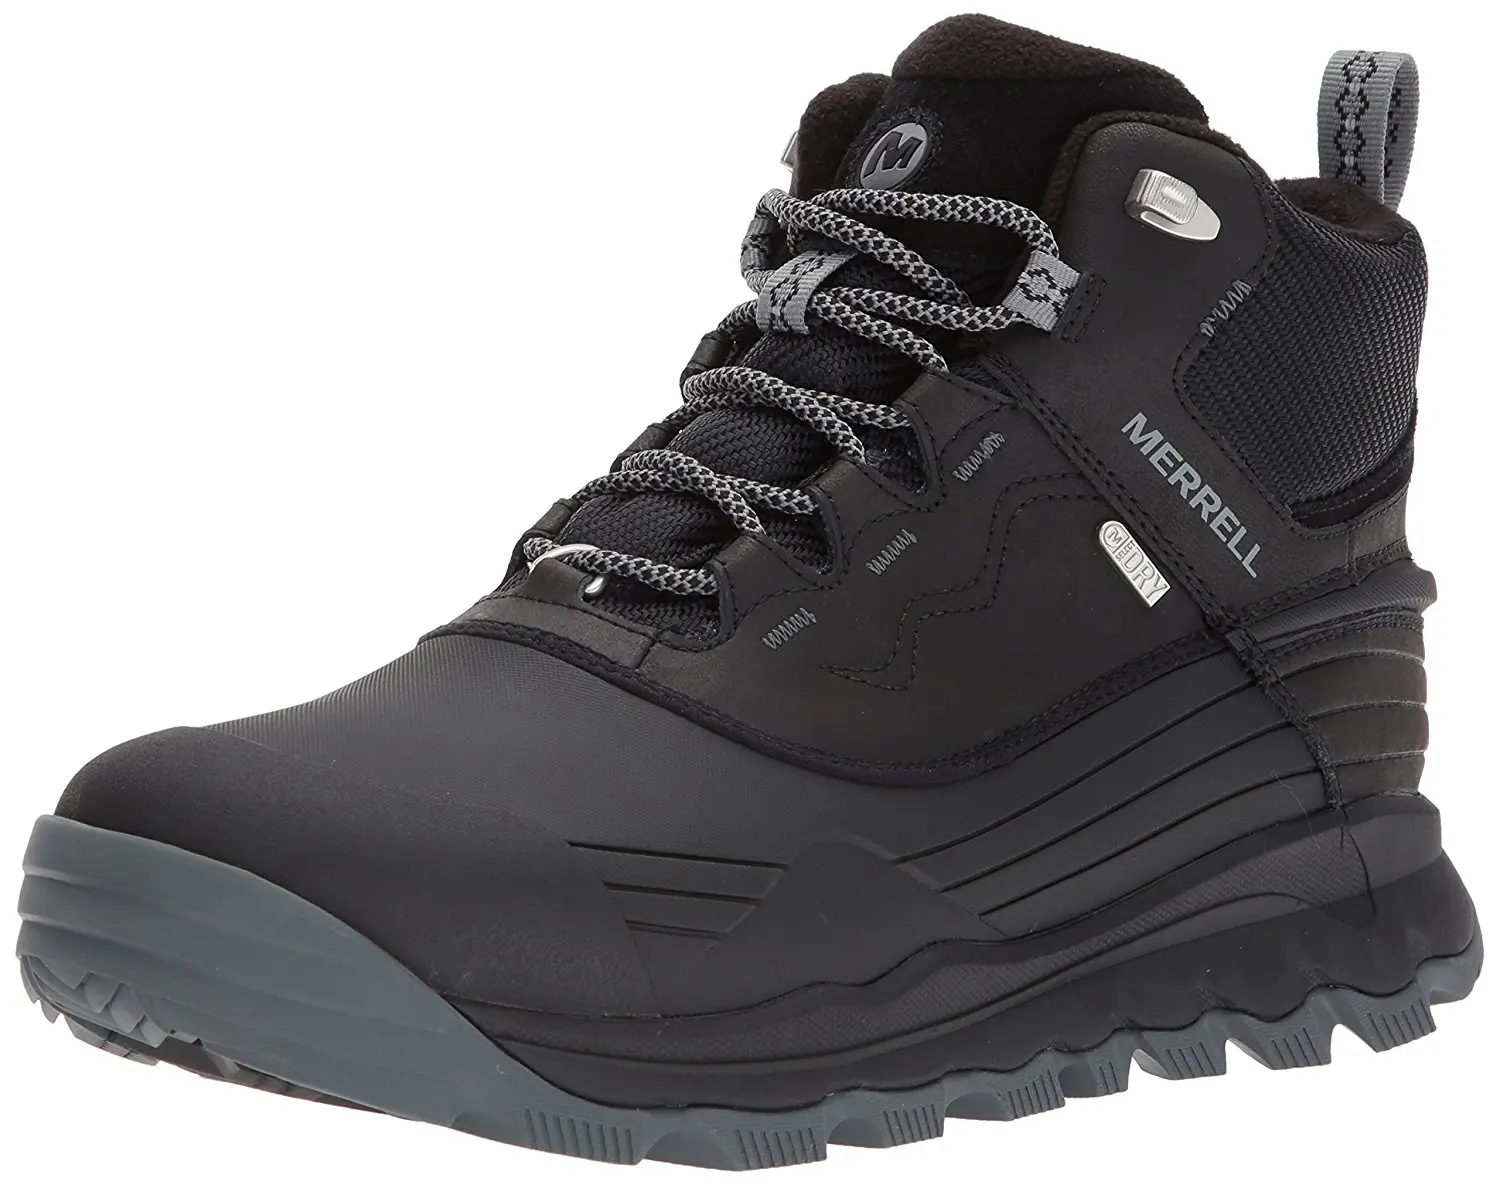 Cheap Merrell Thermo 6, find Merrell 